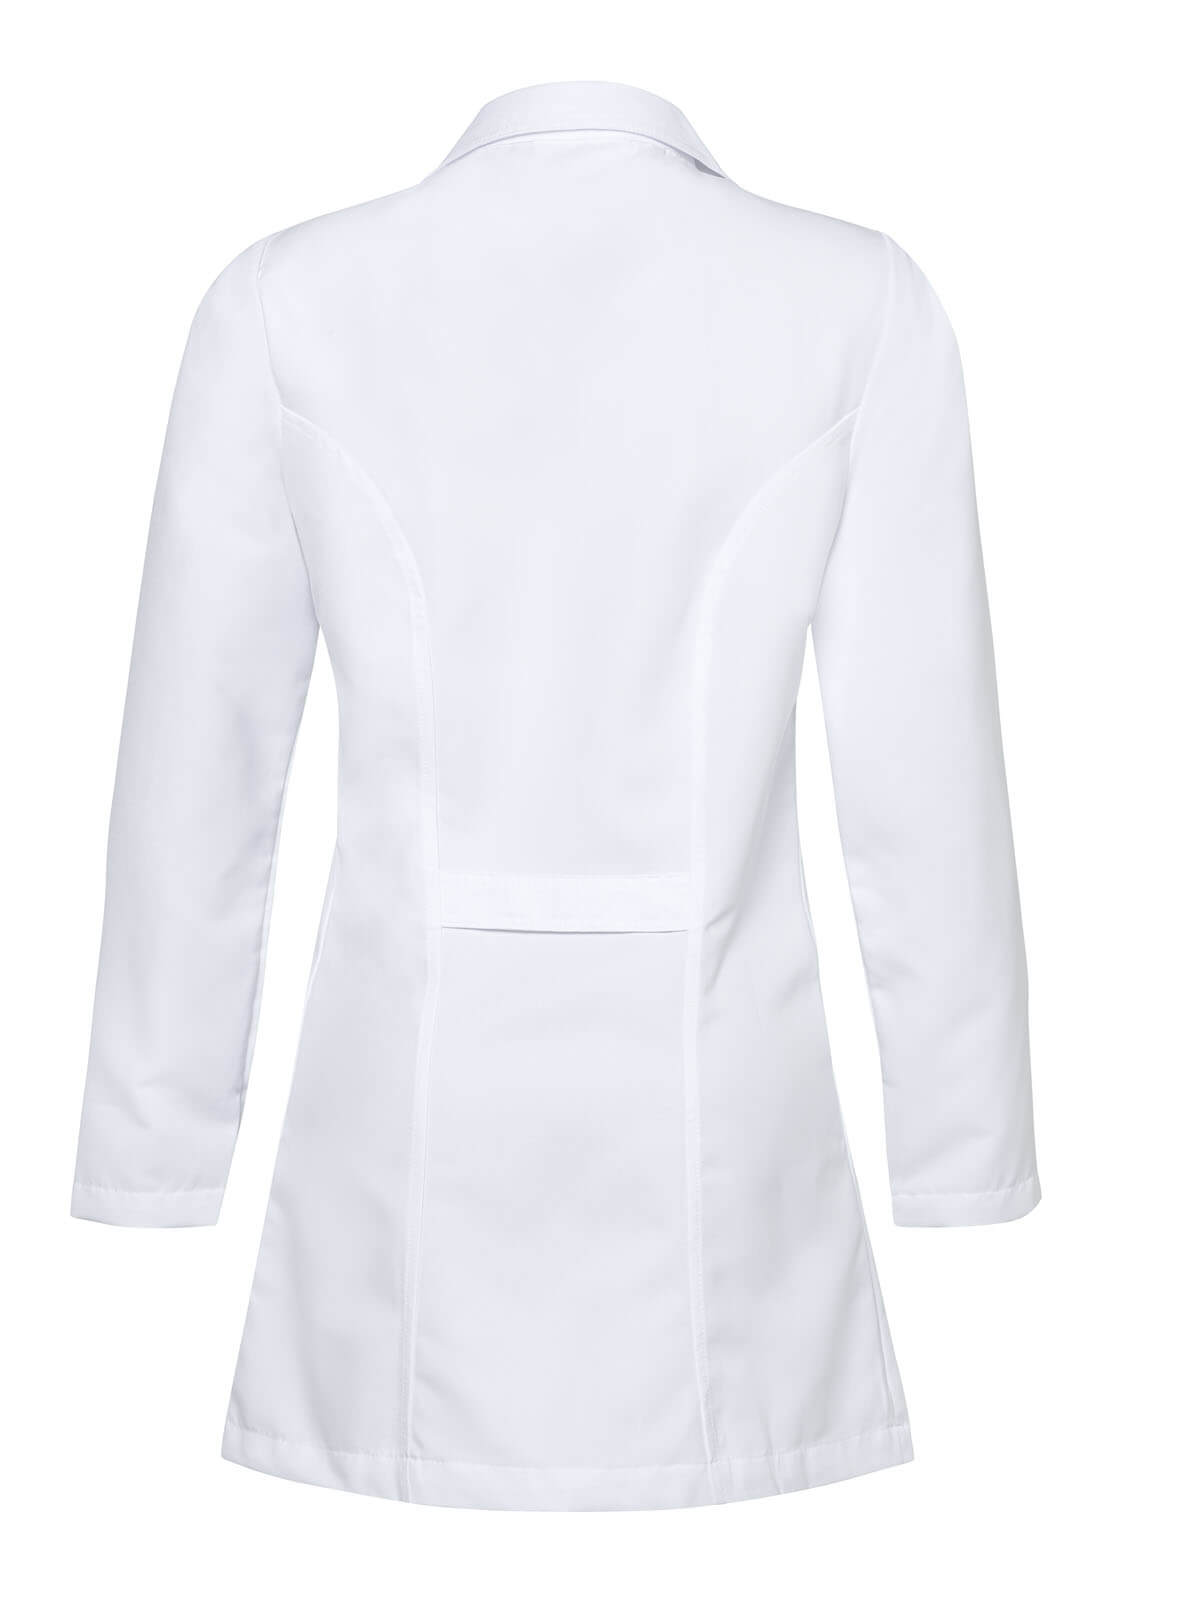 Medical gown white color